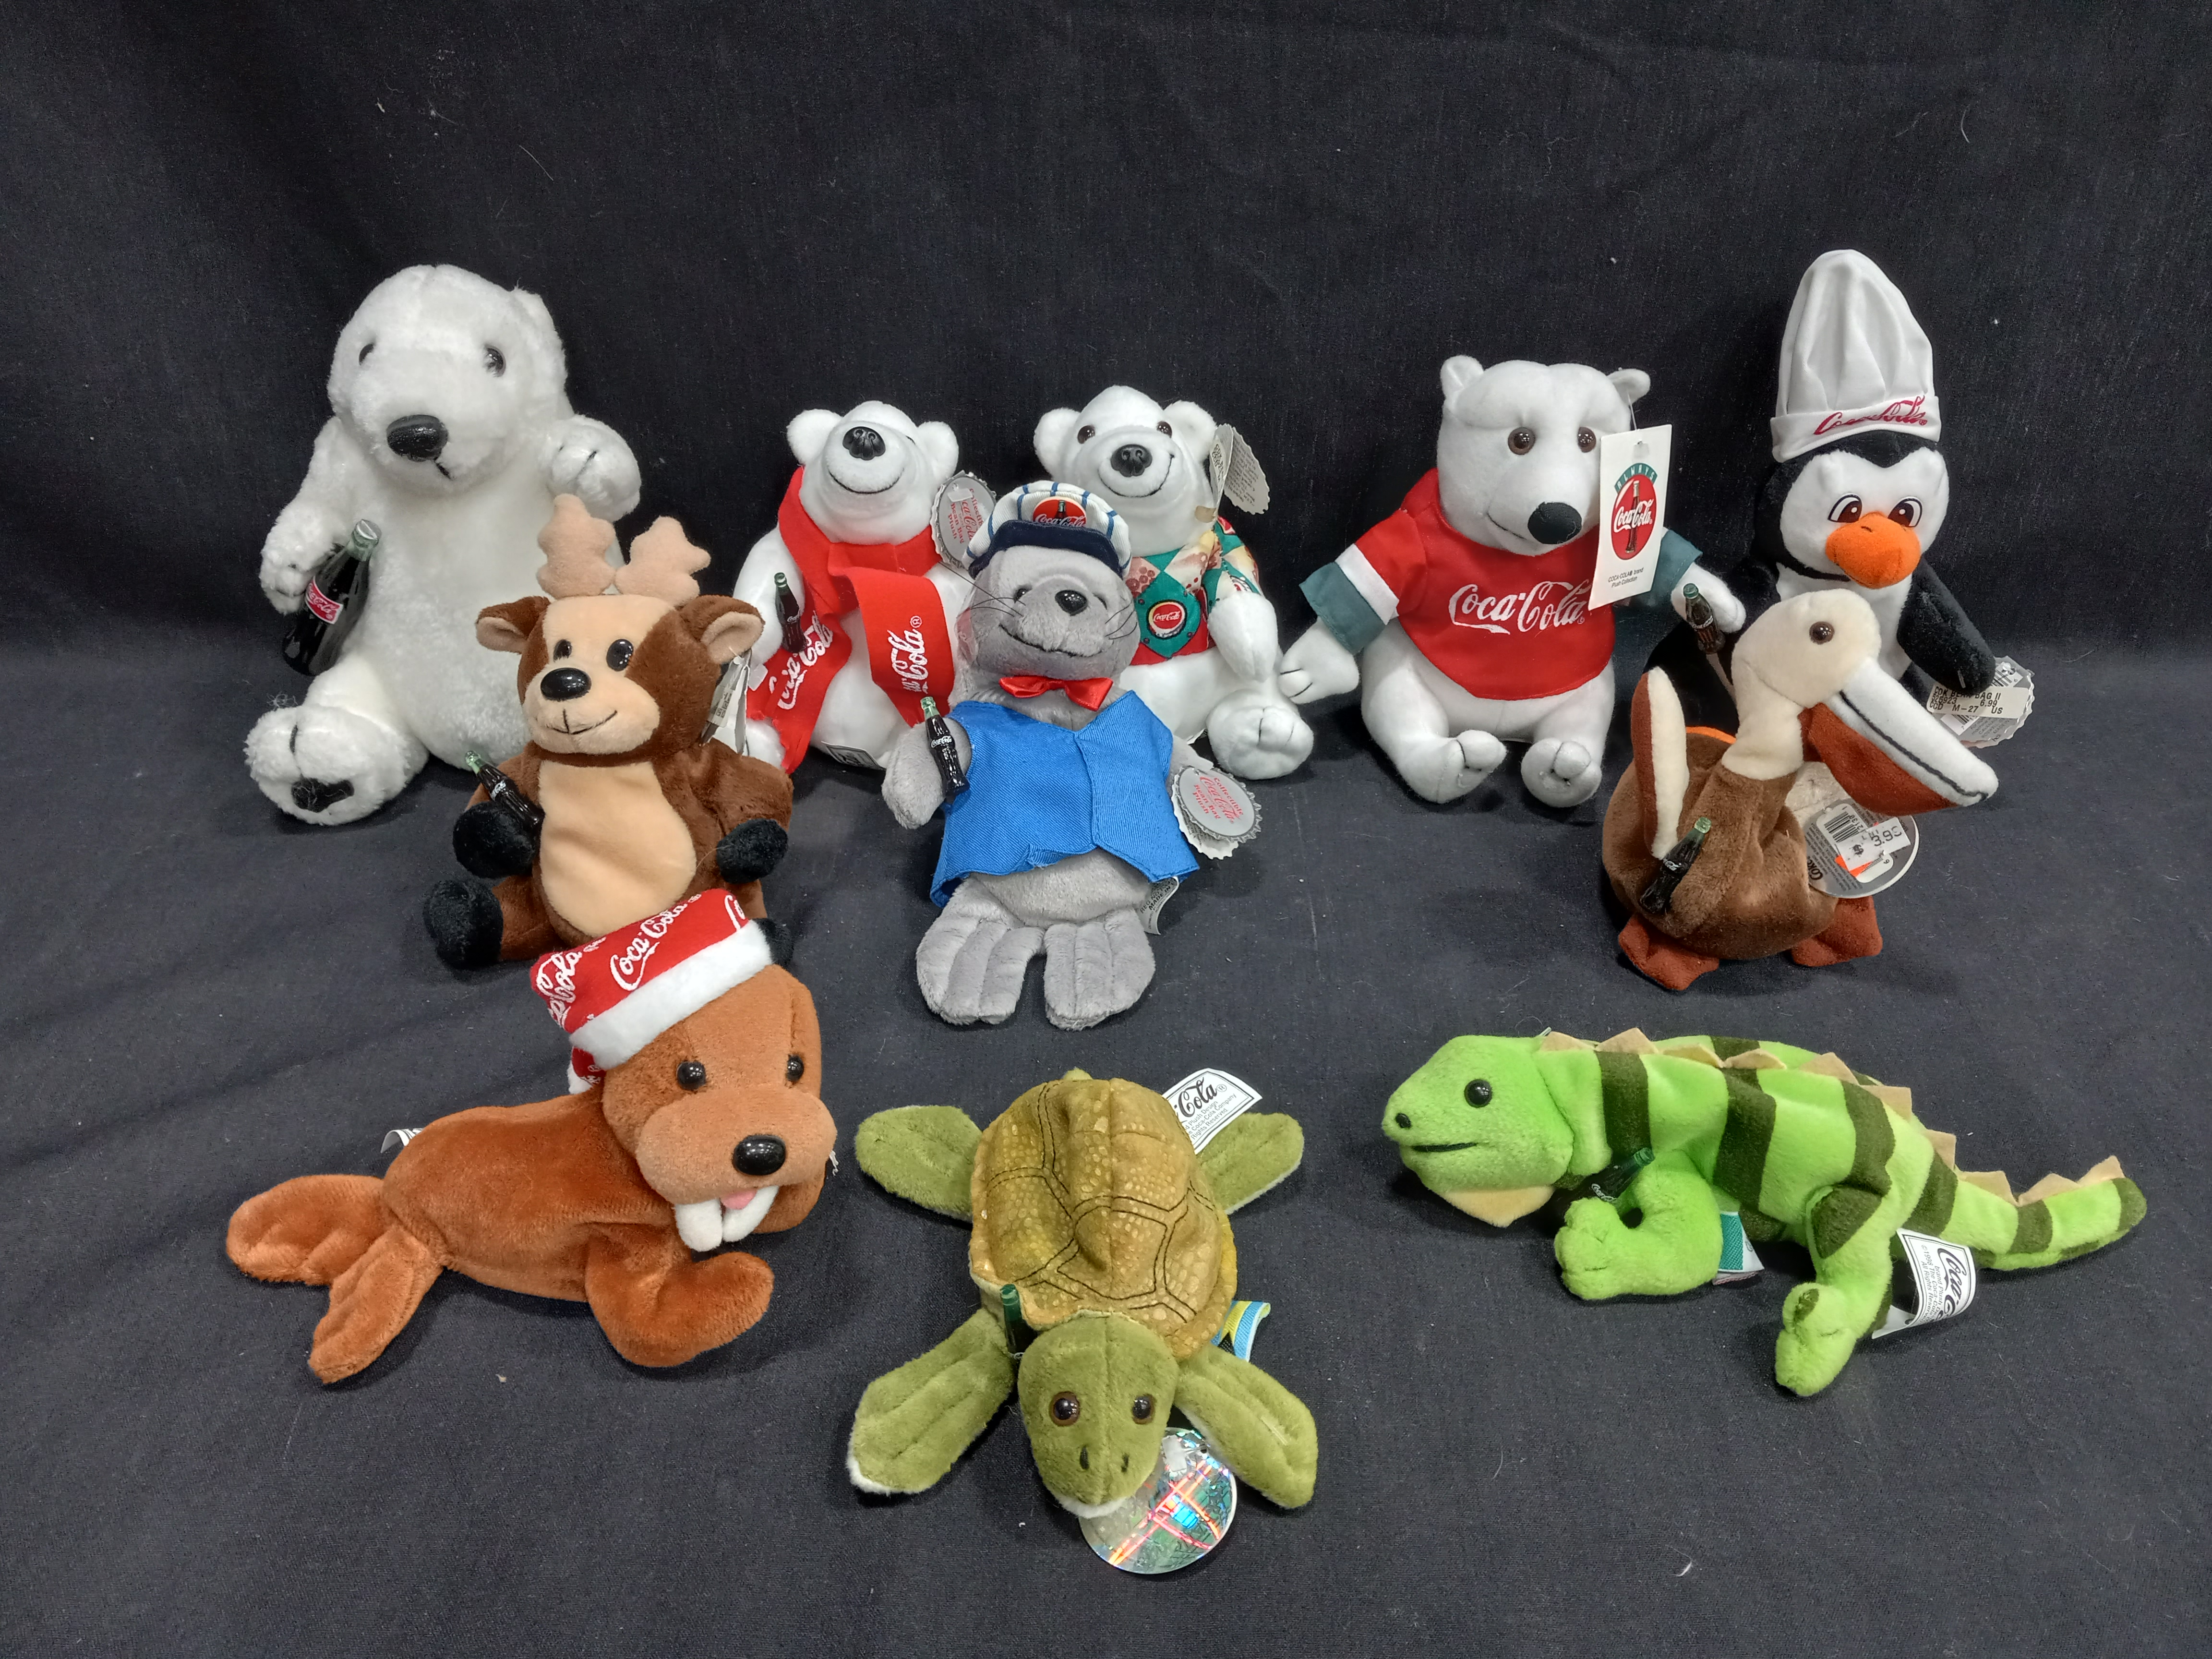 Buy the Bundle of 11 Coca-Cola Plush Animals | GoodwillFinds